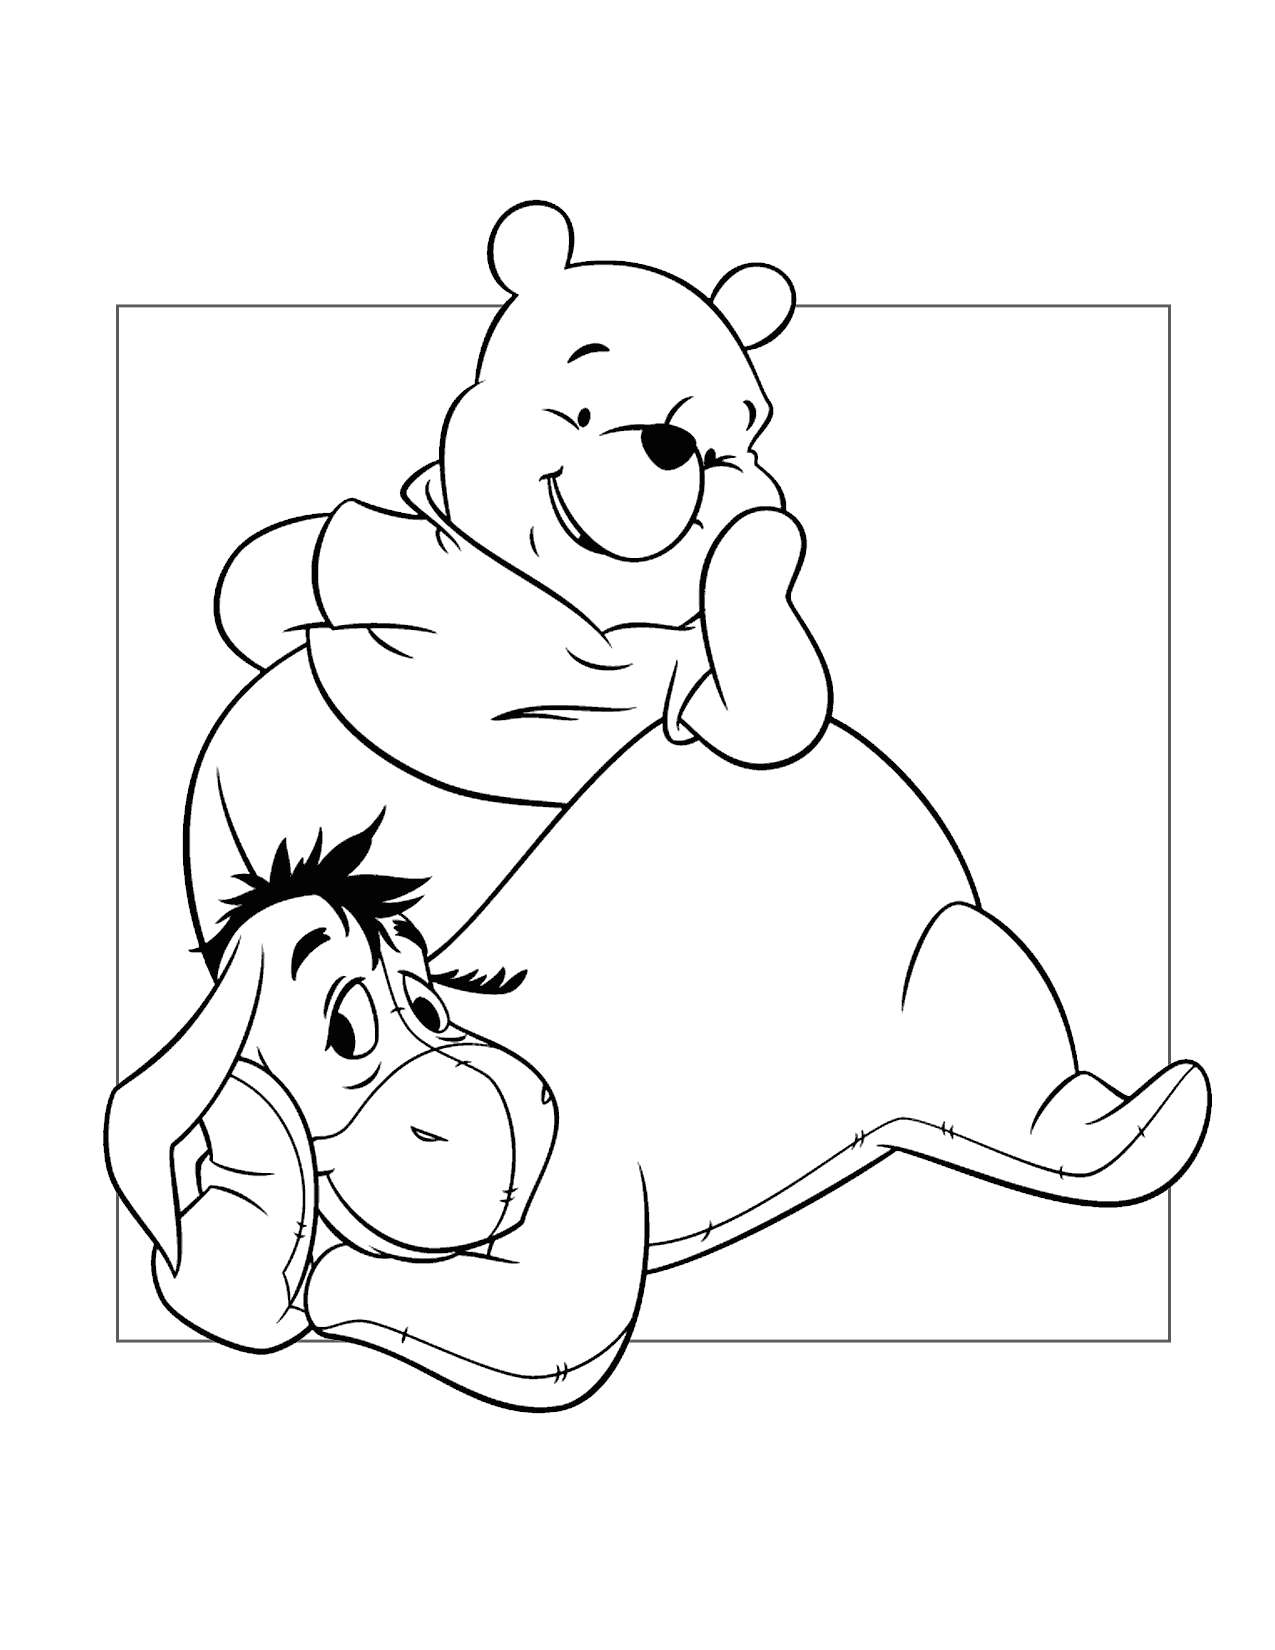 Eeyore And Pooh Coloring Page